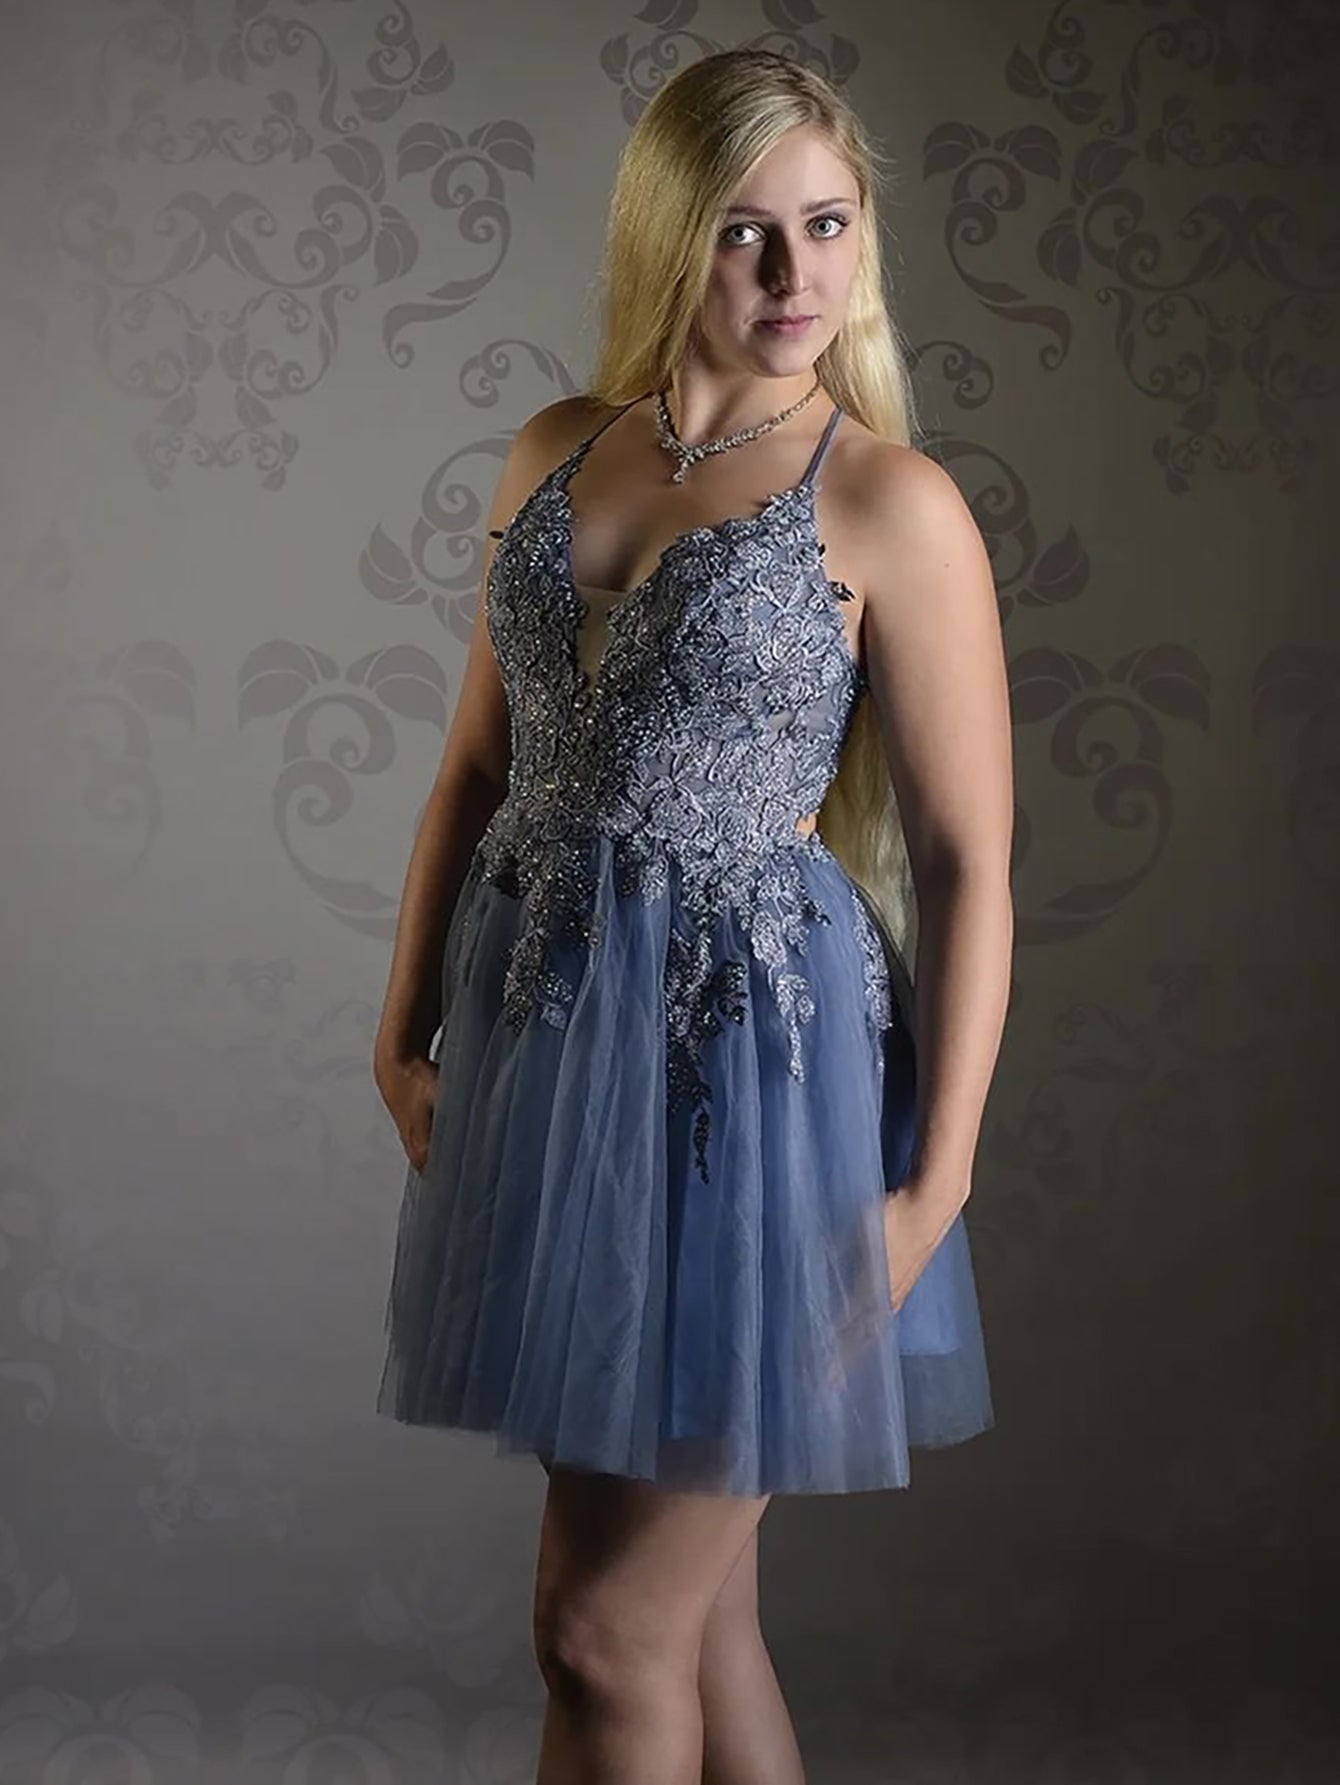 Anya | A Line Applique BlushTulle Short Homecoming Dress